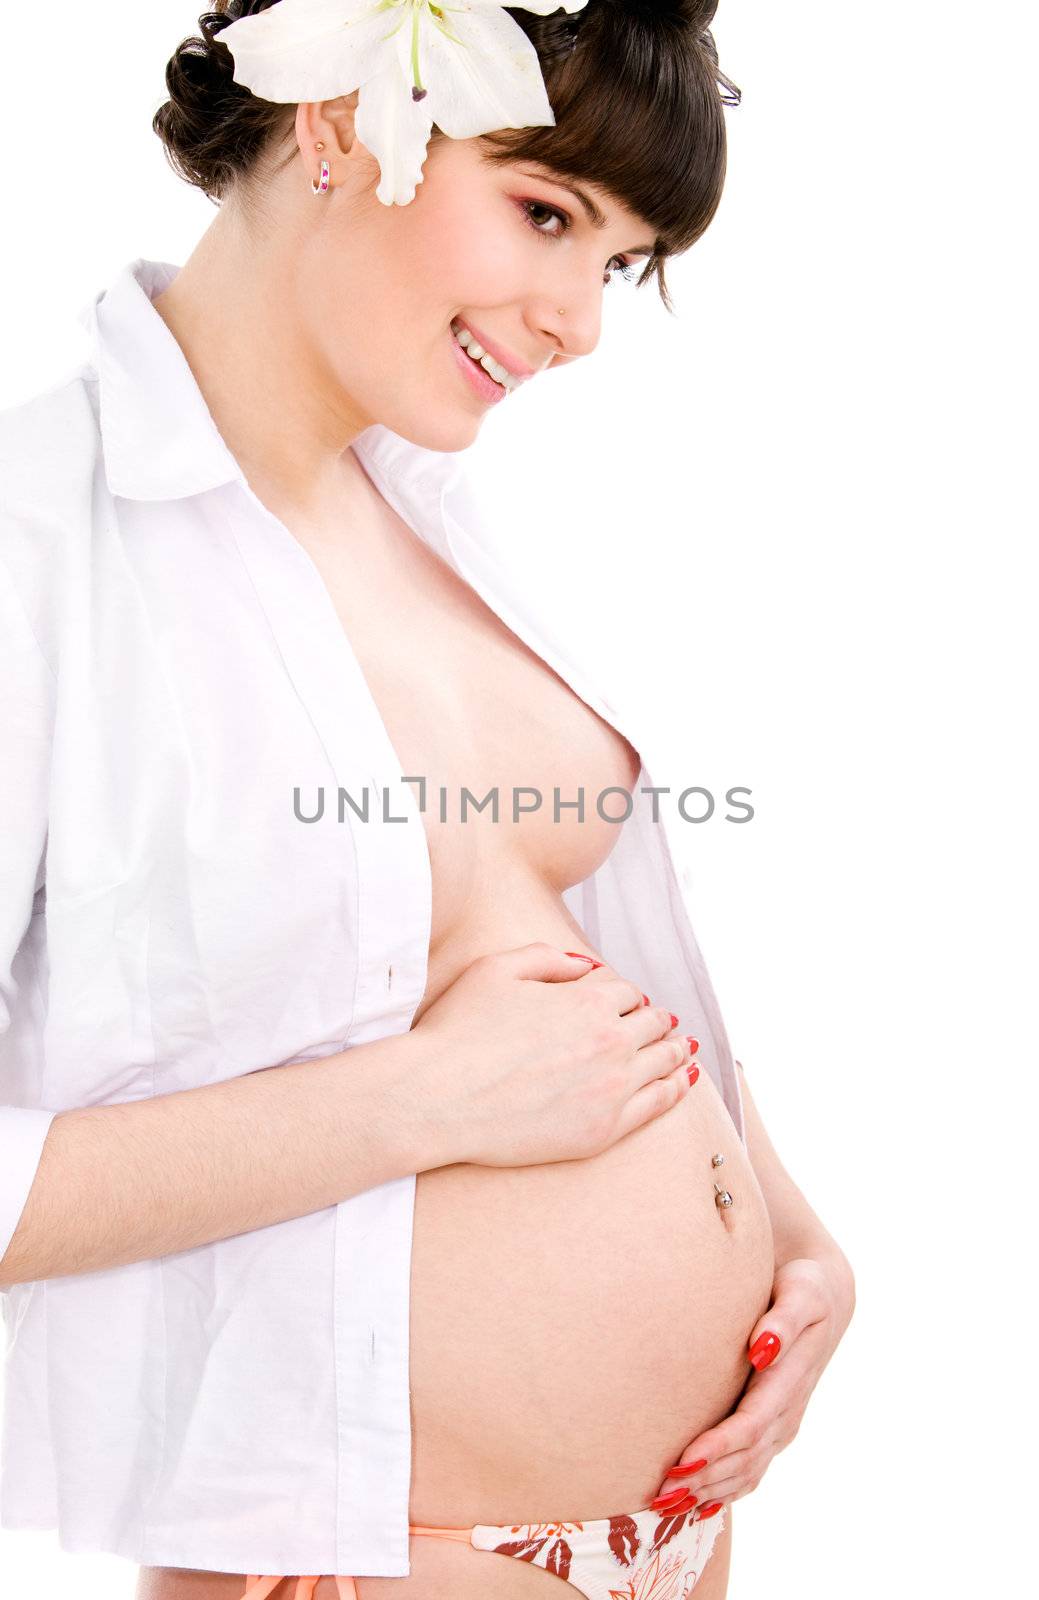 Happy pregnant woman on isolated white